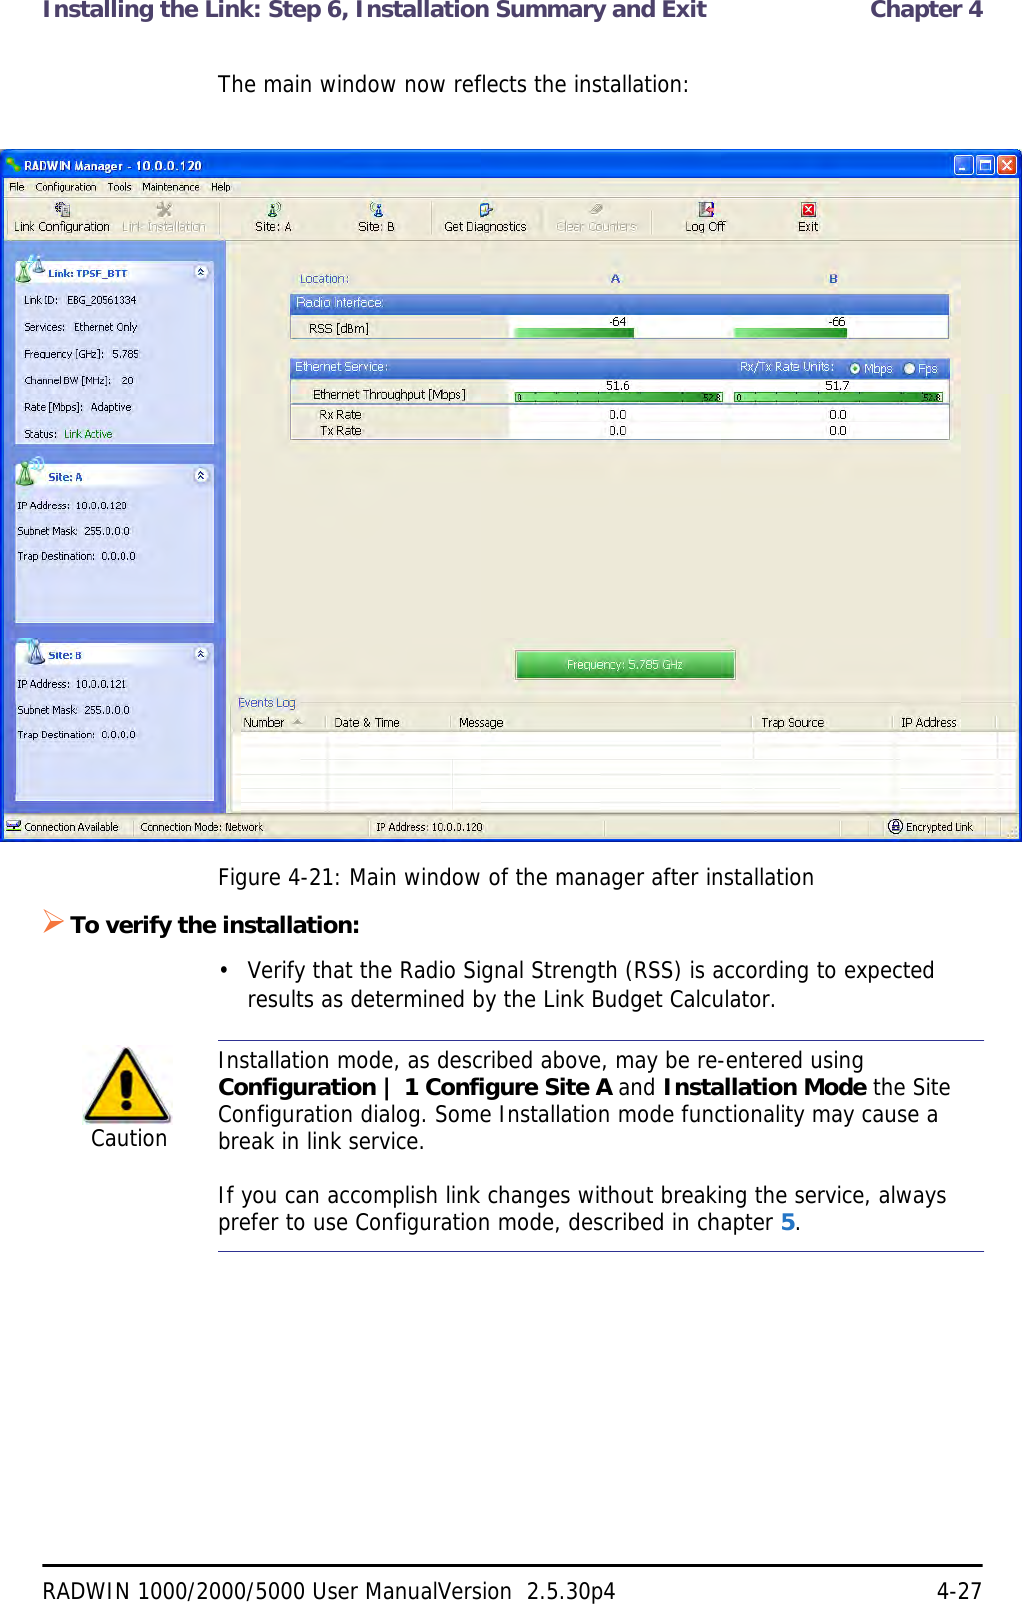 Installing the Link: Step 6, Installation Summary and Exit  Chapter 4RADWIN 1000/2000/5000 User ManualVersion  2.5.30p4 4-27The main window now reflects the installation:Figure 4-21: Main window of the manager after installation To verify the installation:• Verify that the Radio Signal Strength (RSS) is according to expected results as determined by the Link Budget Calculator.CautionInstallation mode, as described above, may be re-entered using Configuration | 1 Configure Site A and Installation Mode the Site Configuration dialog. Some Installation mode functionality may cause a break in link service.If you can accomplish link changes without breaking the service, always prefer to use Configuration mode, described in chapter 5. 